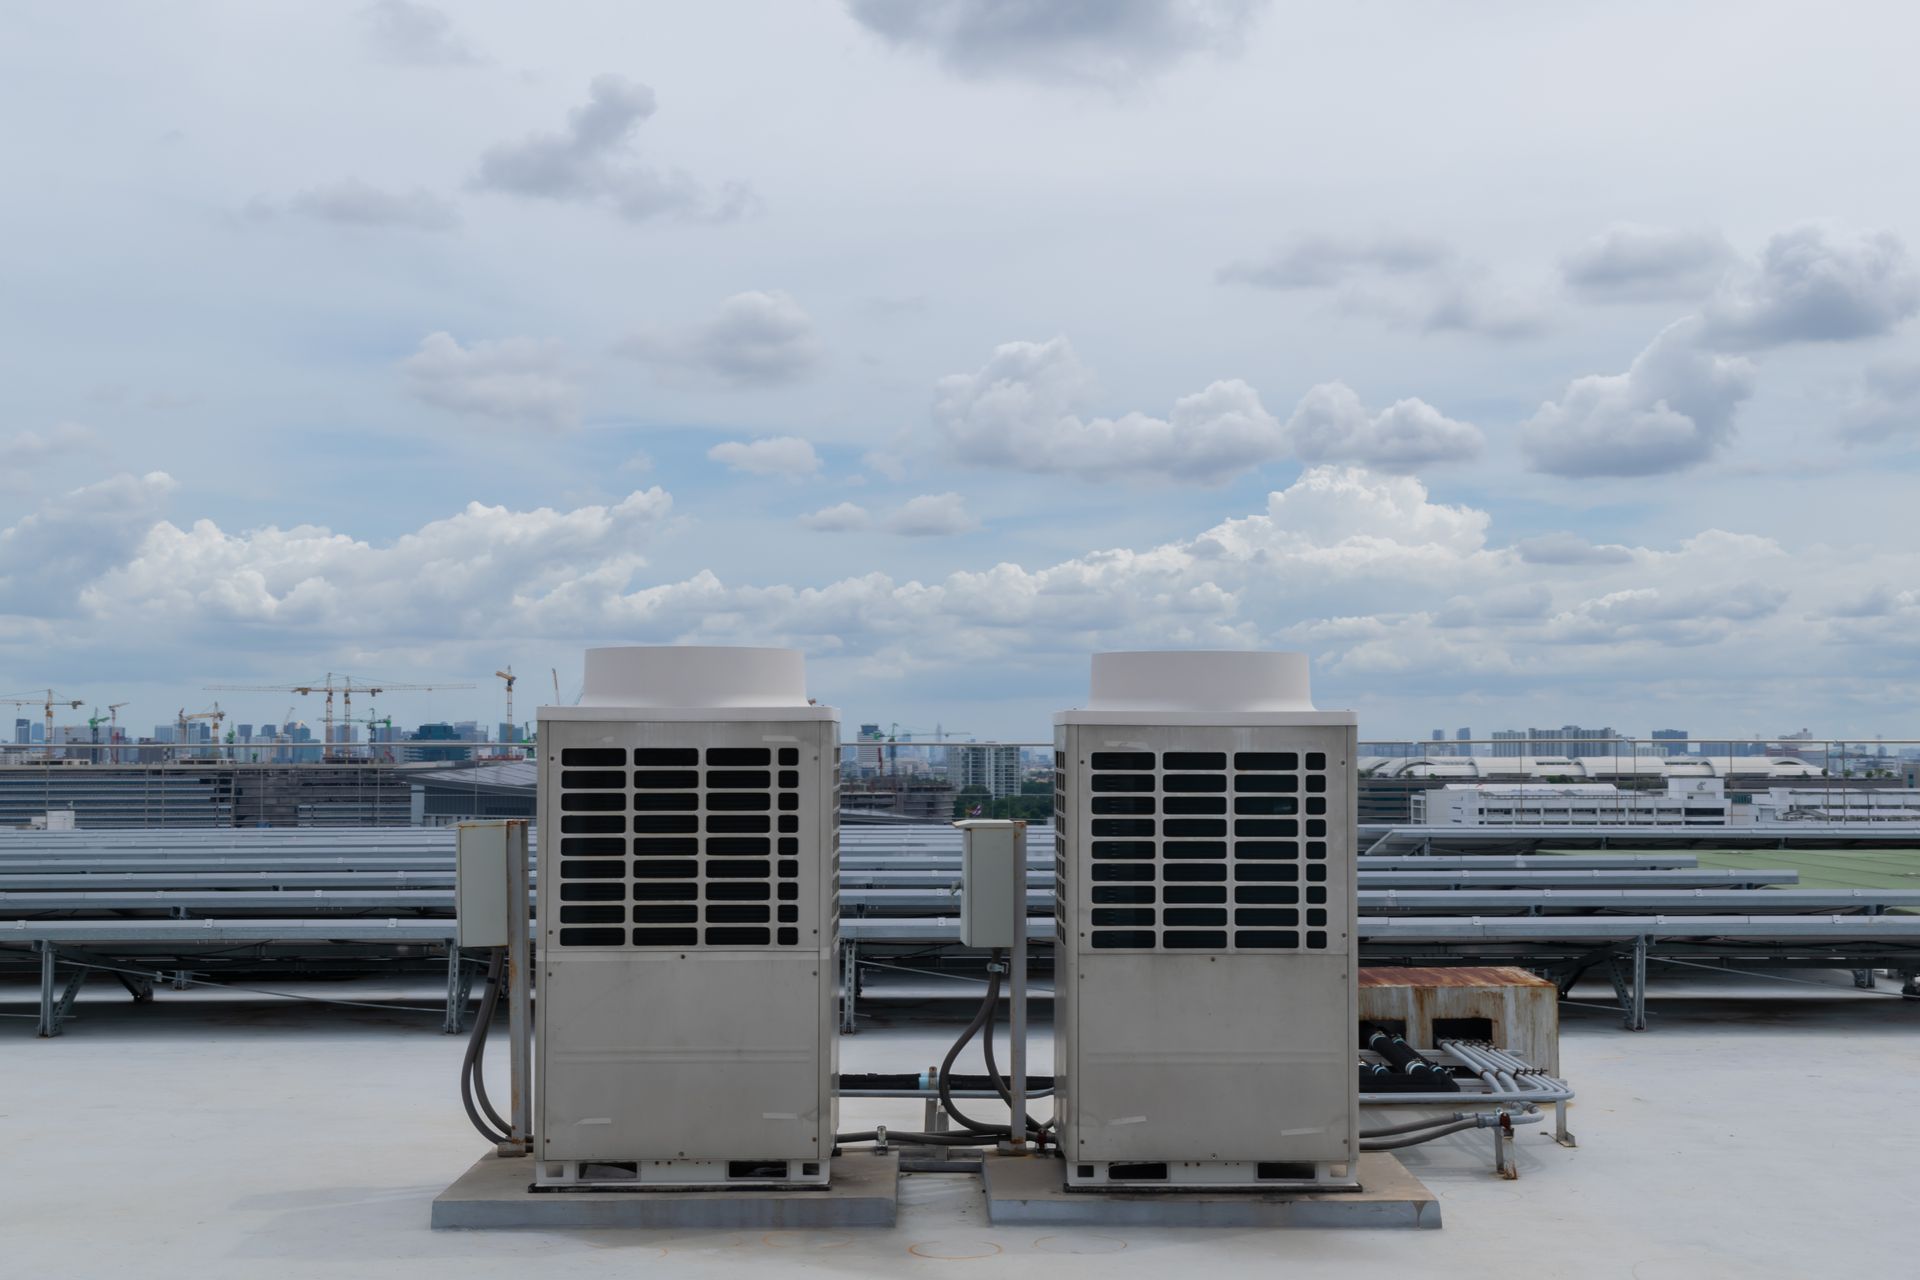 Image shows Industrial size HVAC systems on a rooftop.